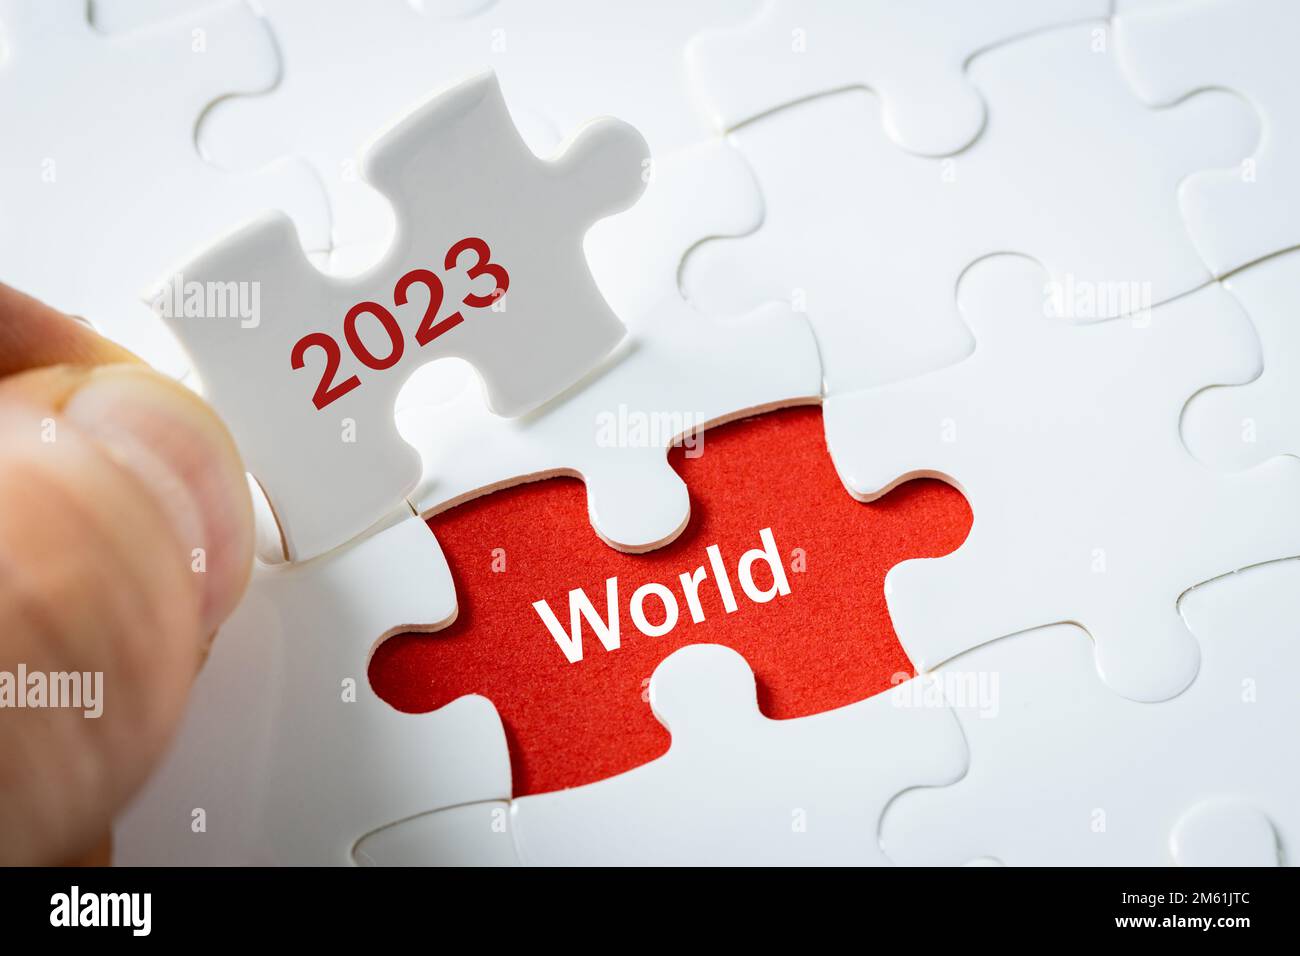 year 2023, World, Predictions, World events Stock Photo